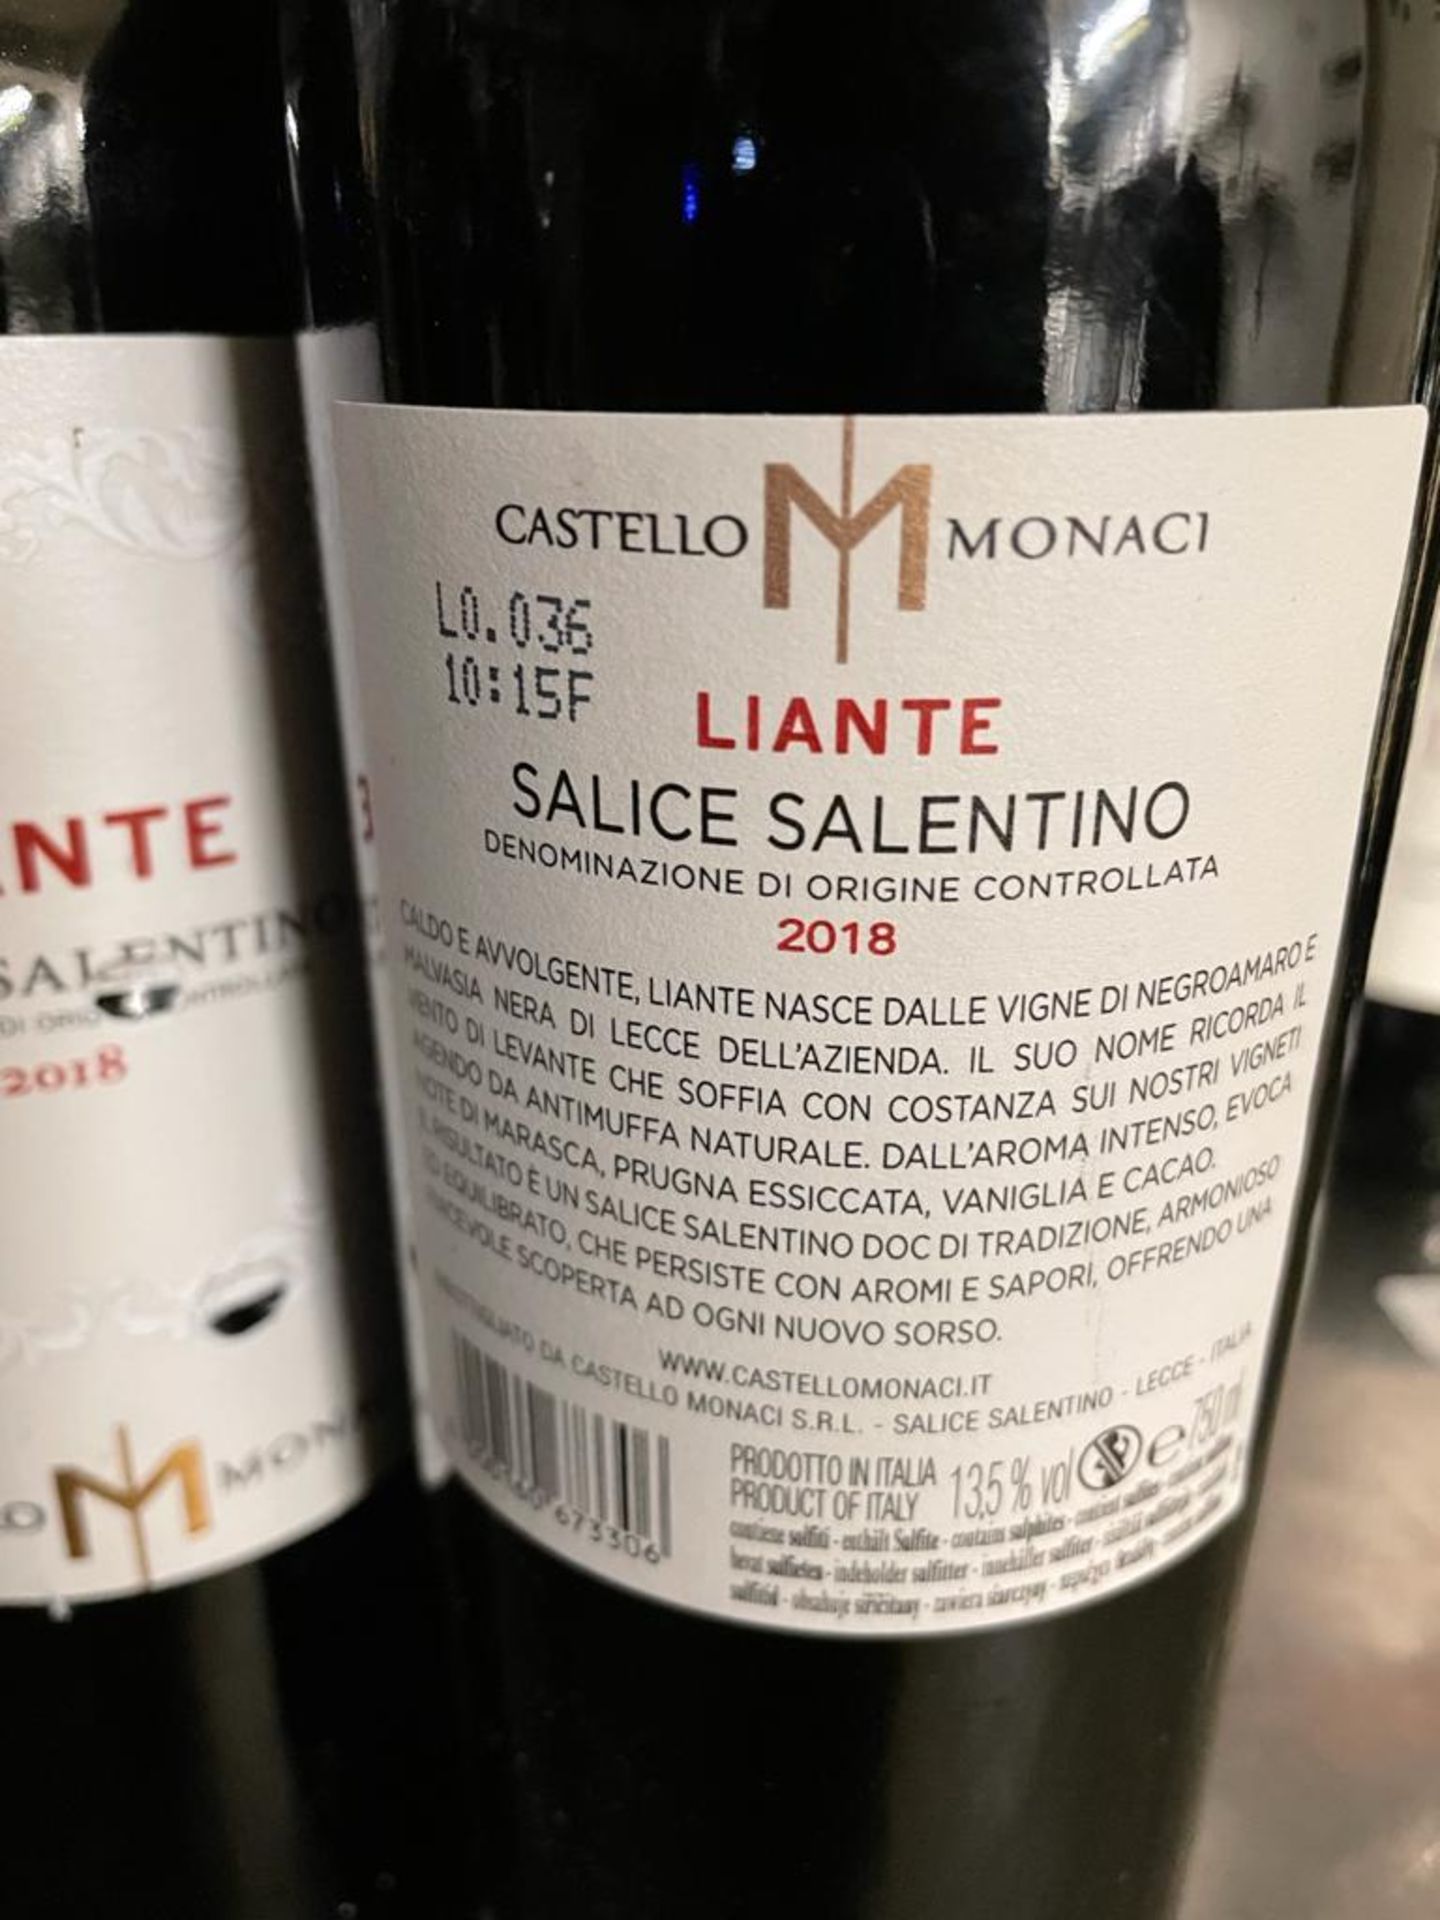 3 x Bottles Of LILANTE SALICE SALENTINO - 2018 - 75cl - New/Unopened Restaurant Stock - Ref: CAM651 - Image 2 of 3